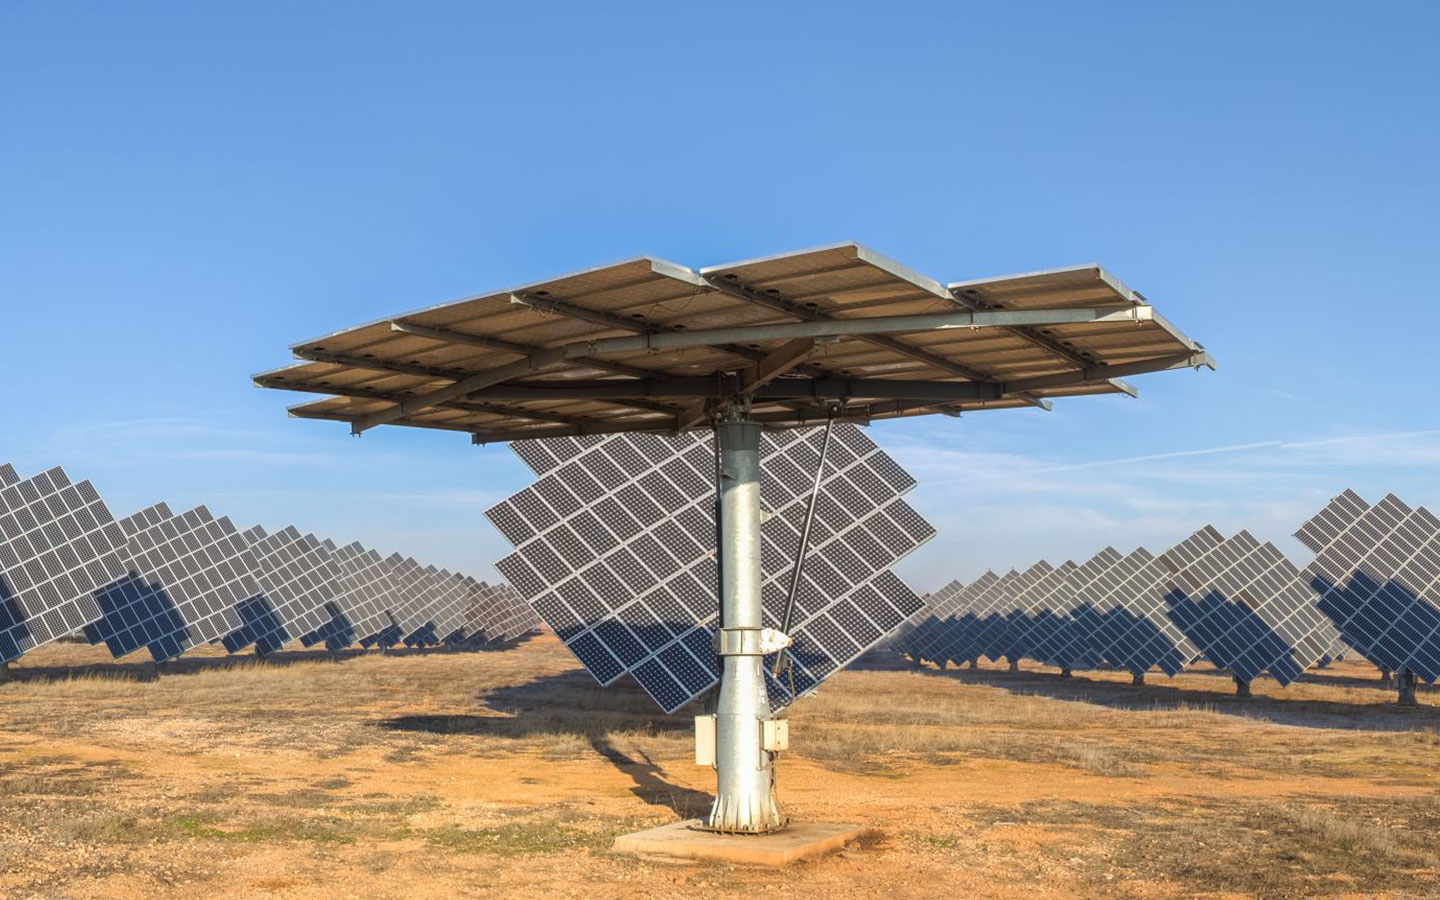 Feasibility study launched for 300MW solar-plus-storage project in Mozambique